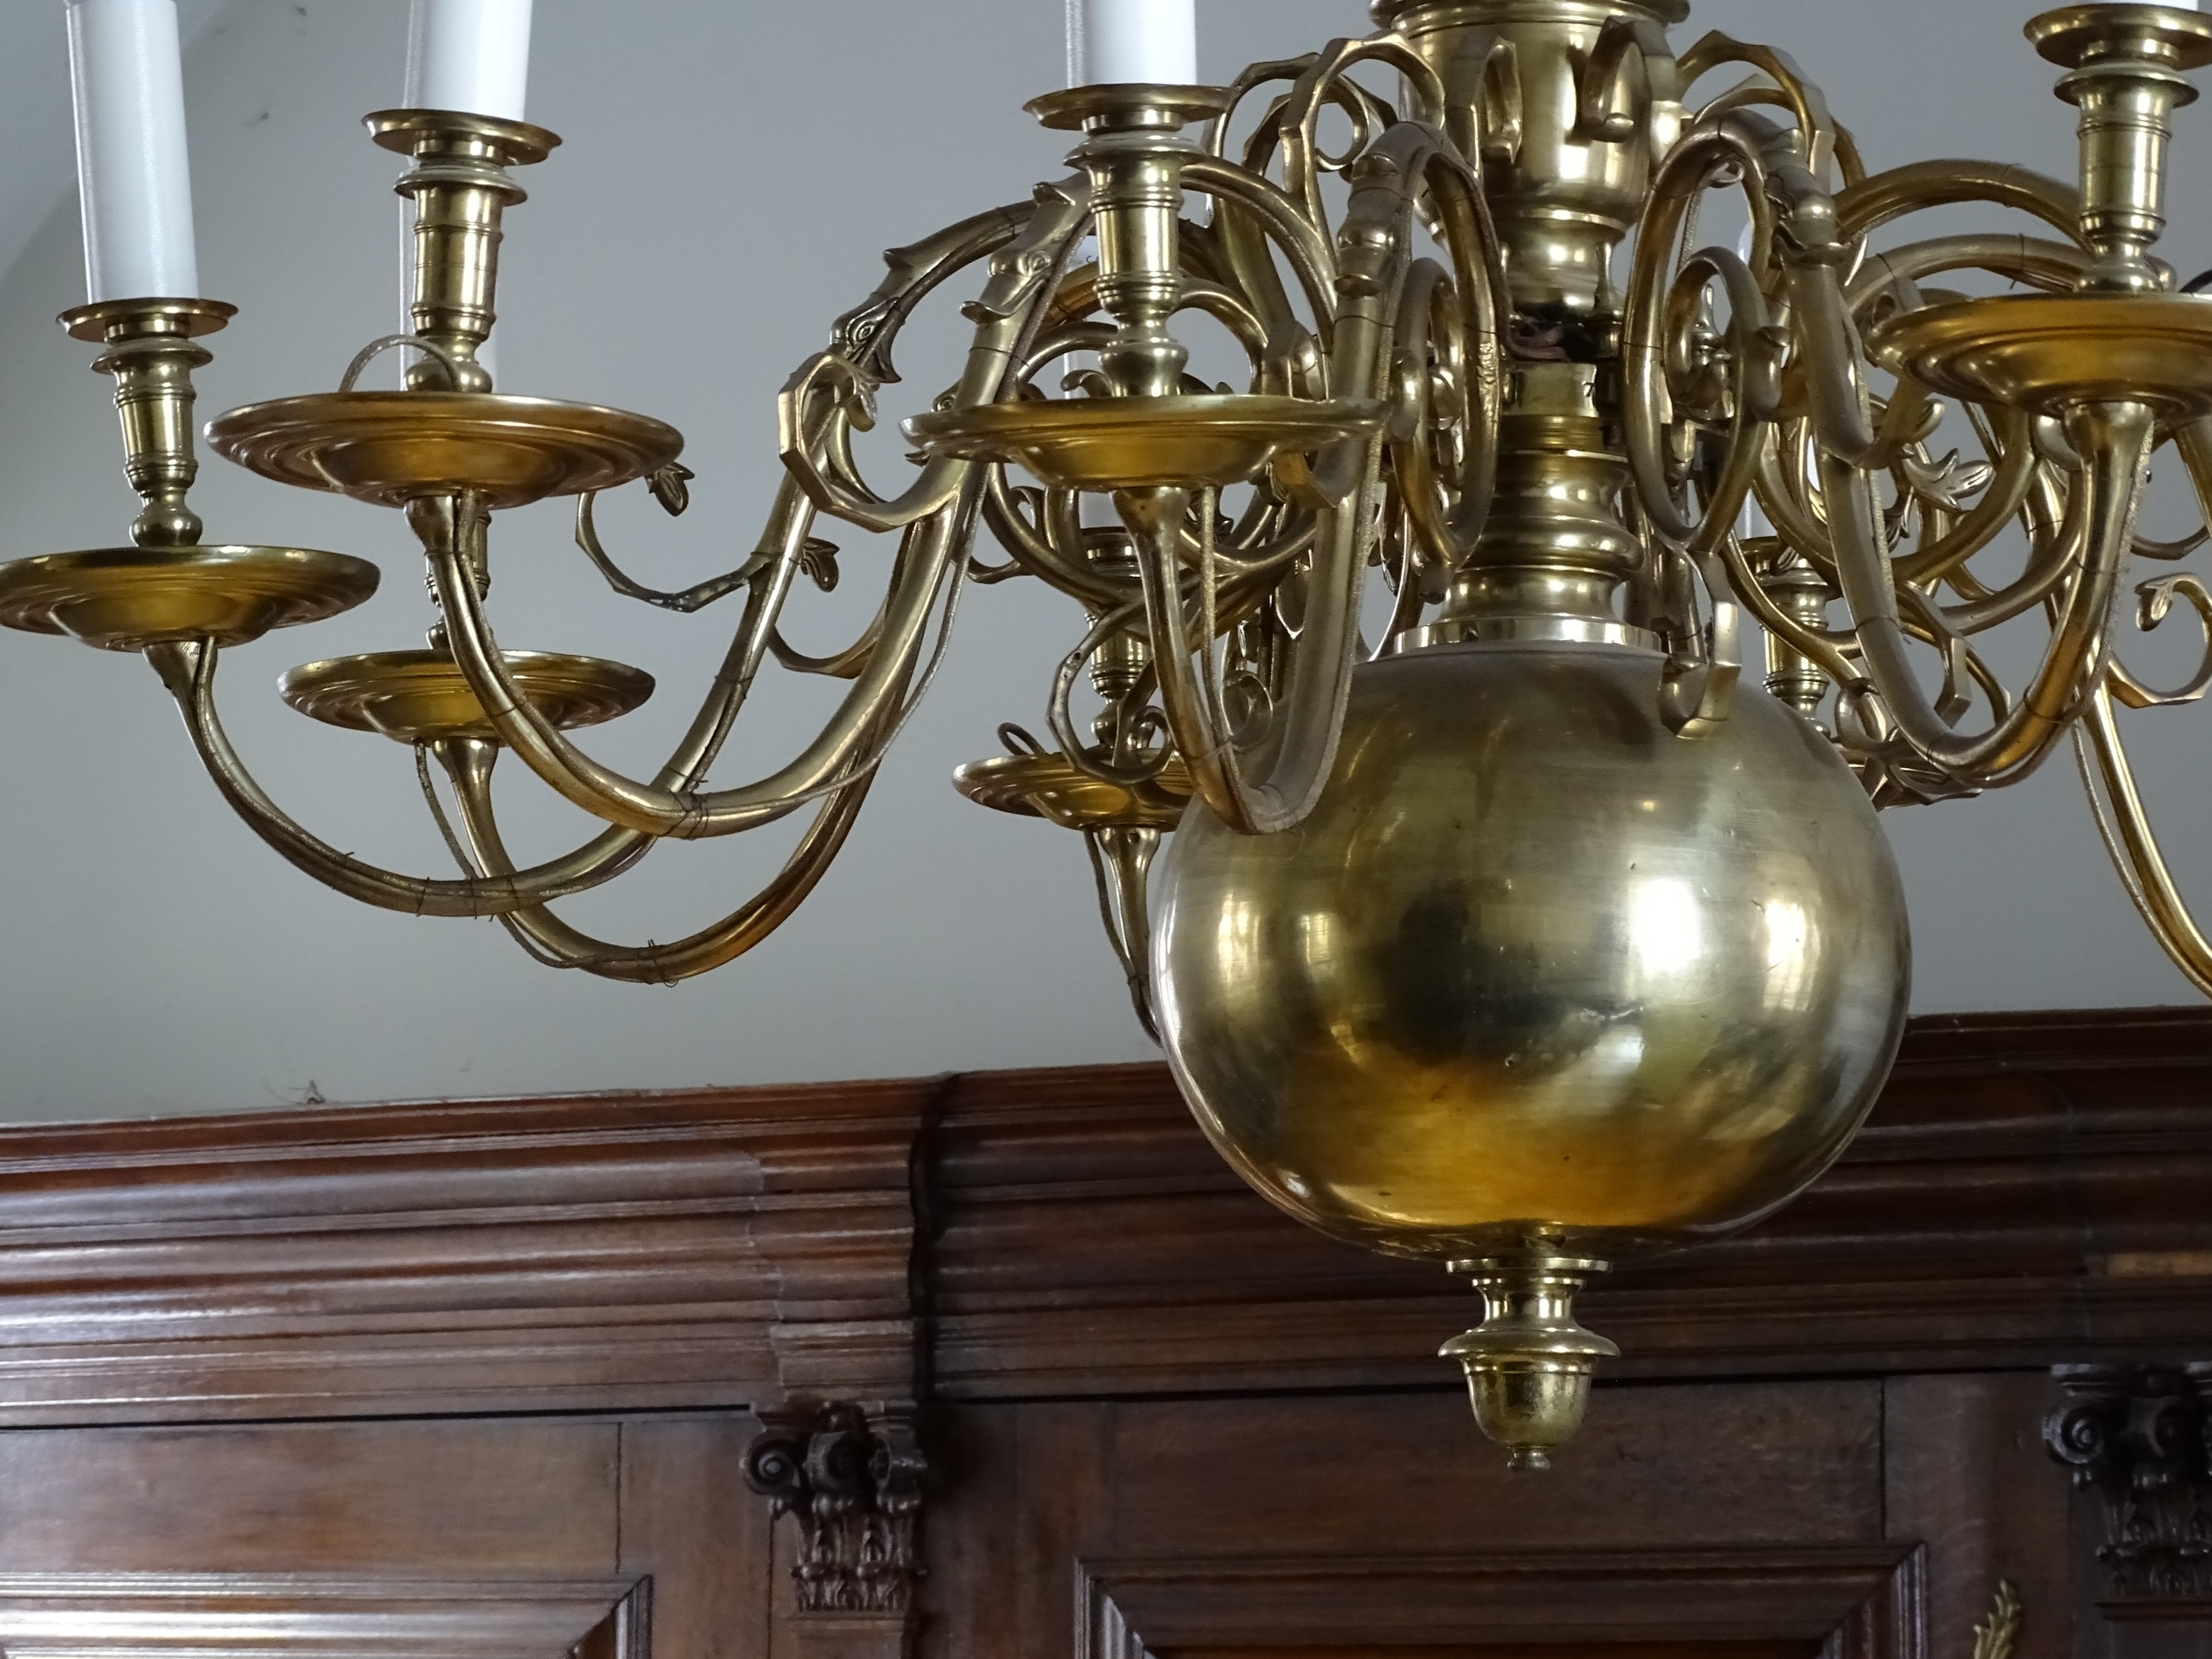 Fragment of the chandelier, 1699, Riga's Great Guild building. Photo by Alante Valtaite-Gagac, 2022